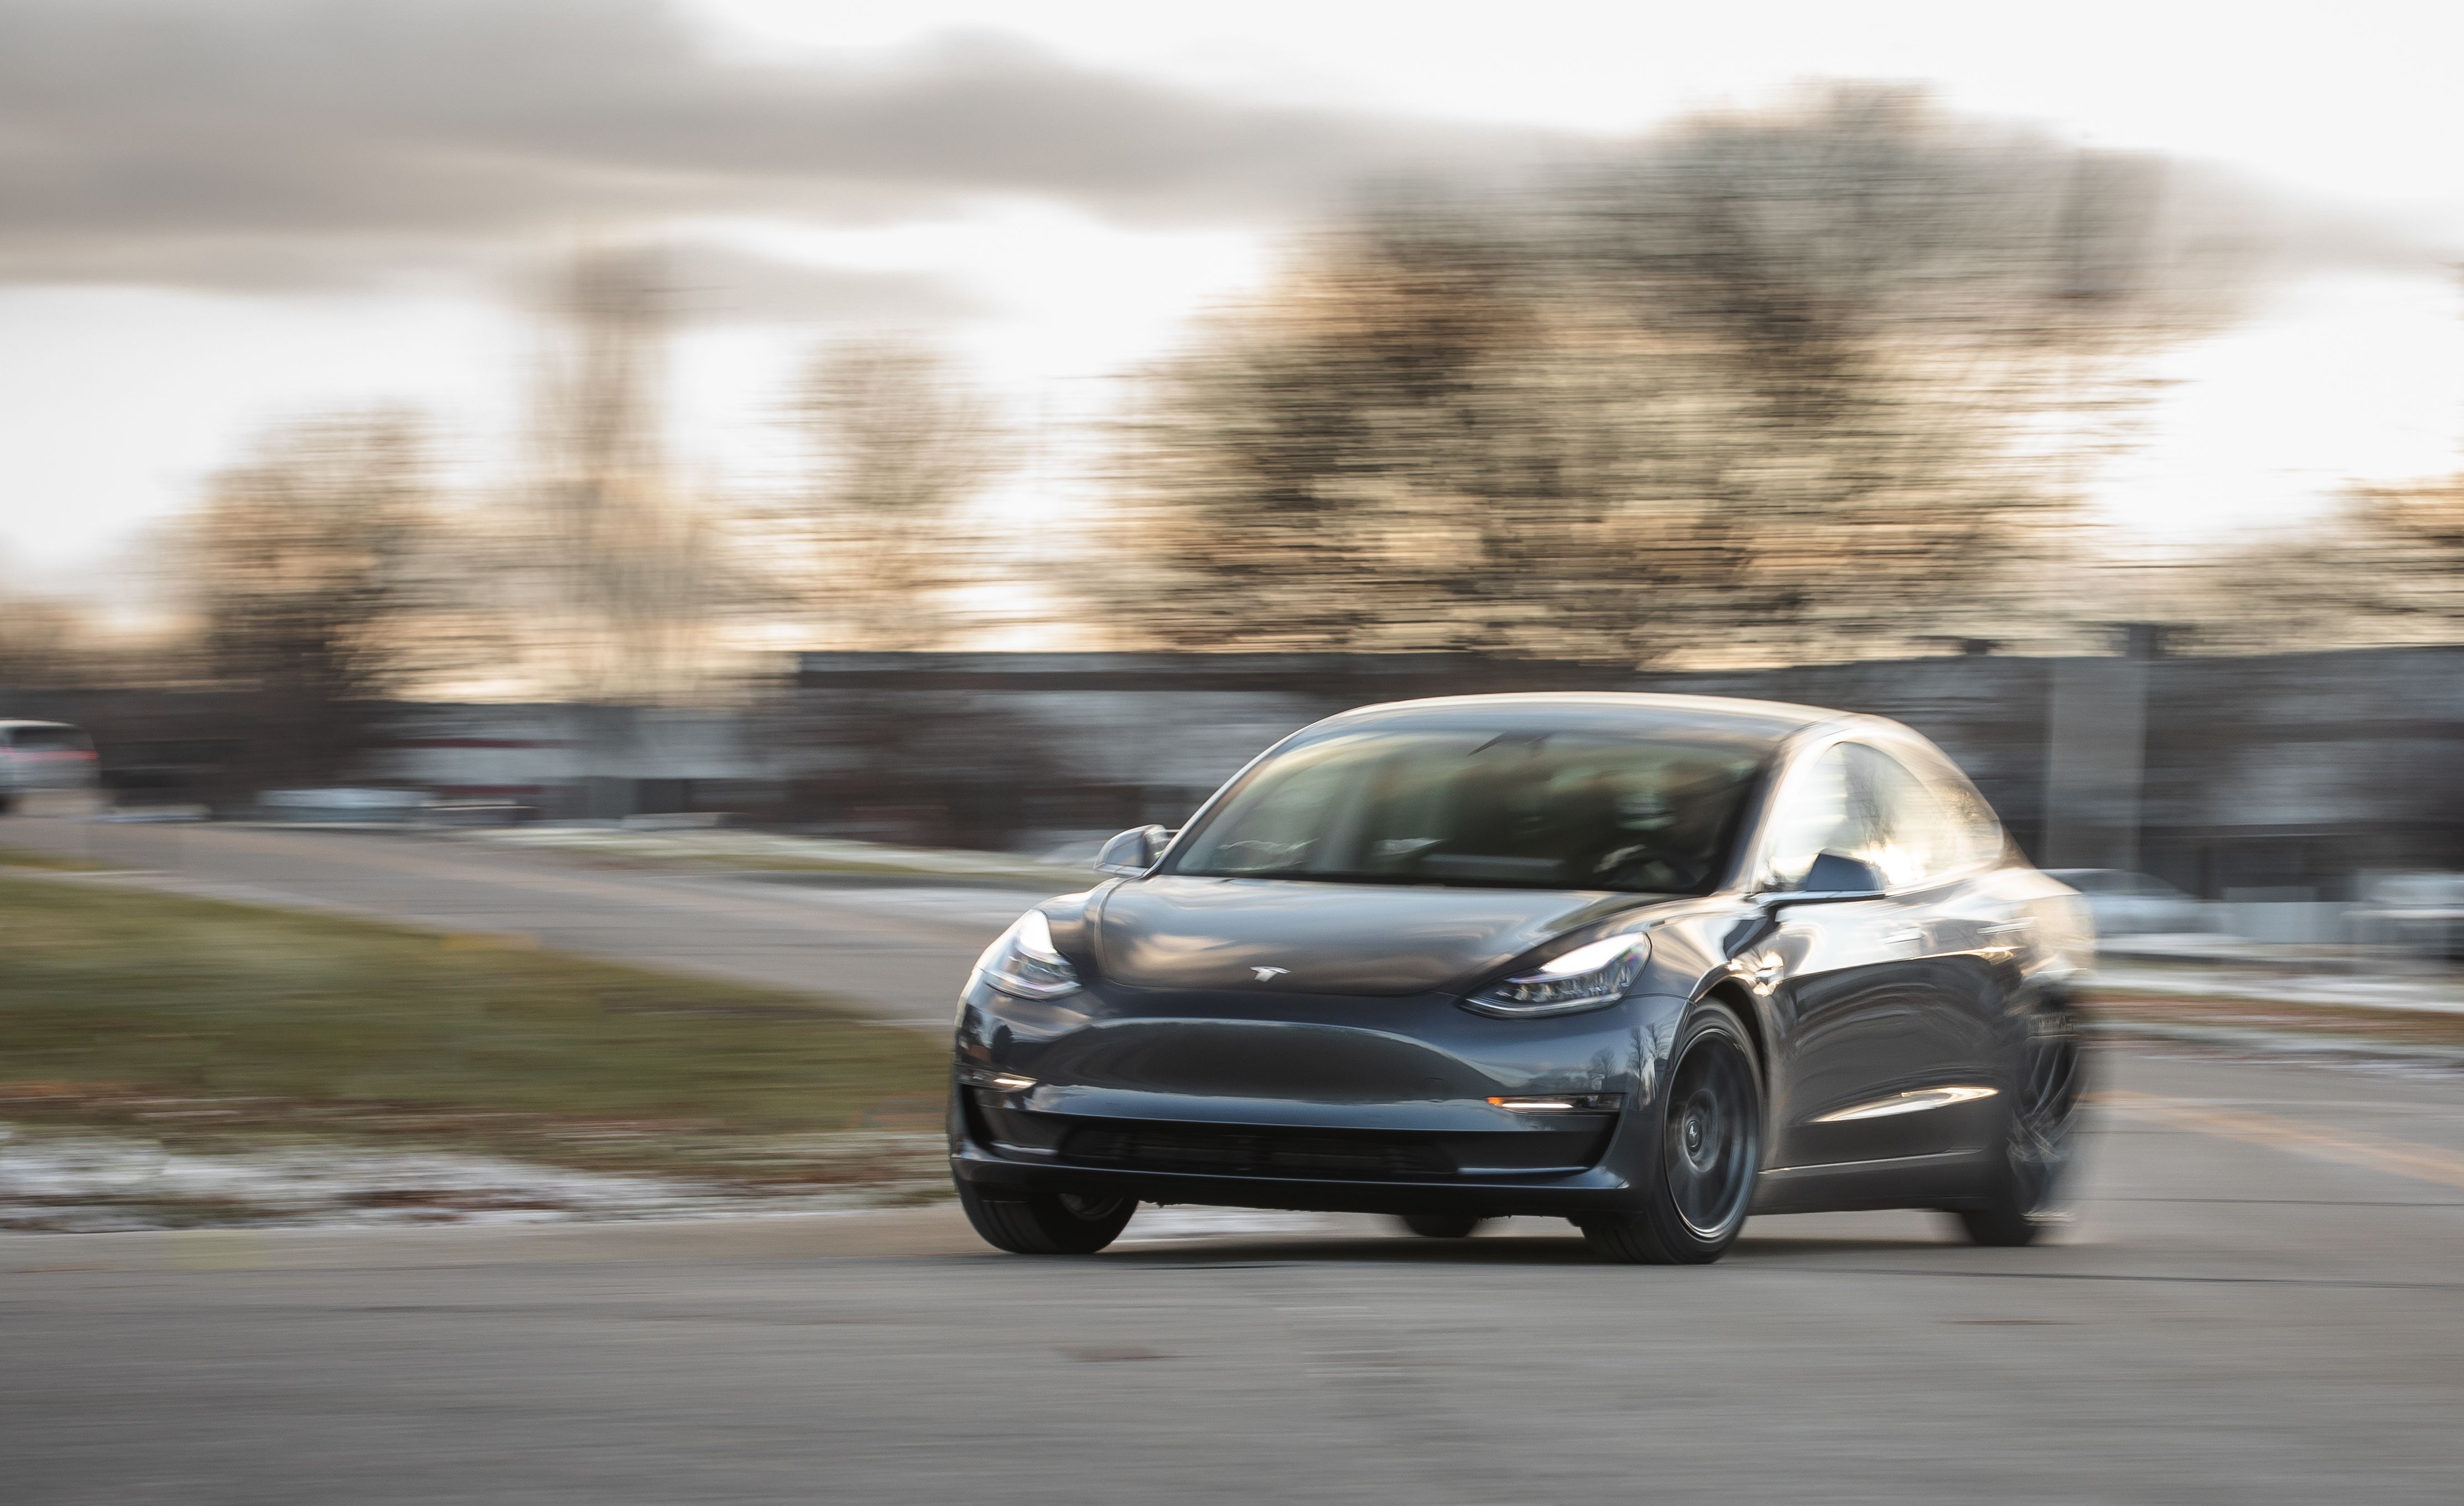 Arving salat misundelse Our Tesla Model 3 Lost 7 Percent of Battery Capacity in 24K Miles